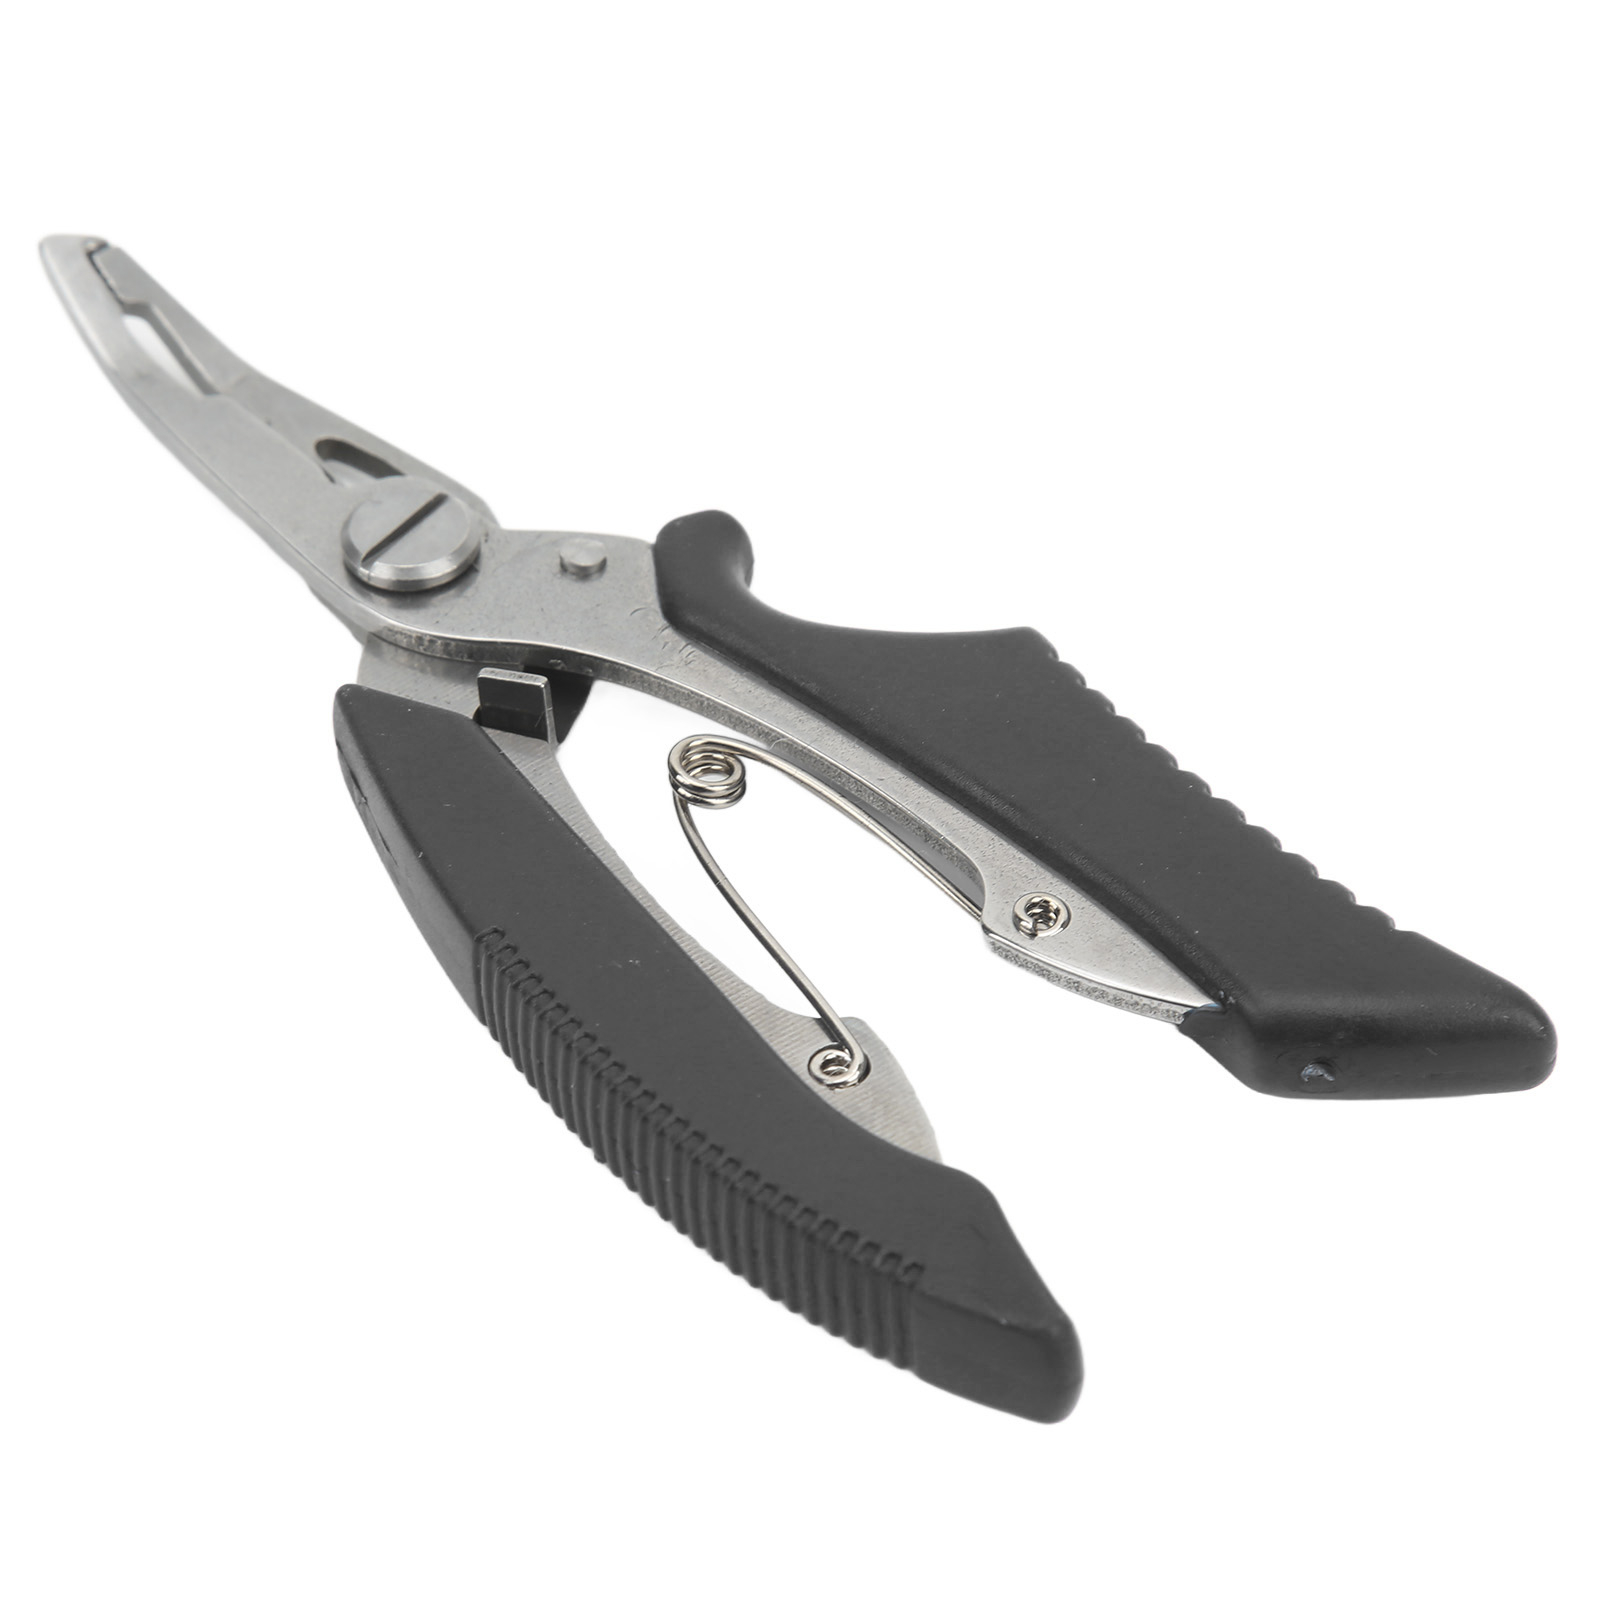 Fishing Pliers, Curved Mouth Ergonomic Reduce Fatigue Fishing Line